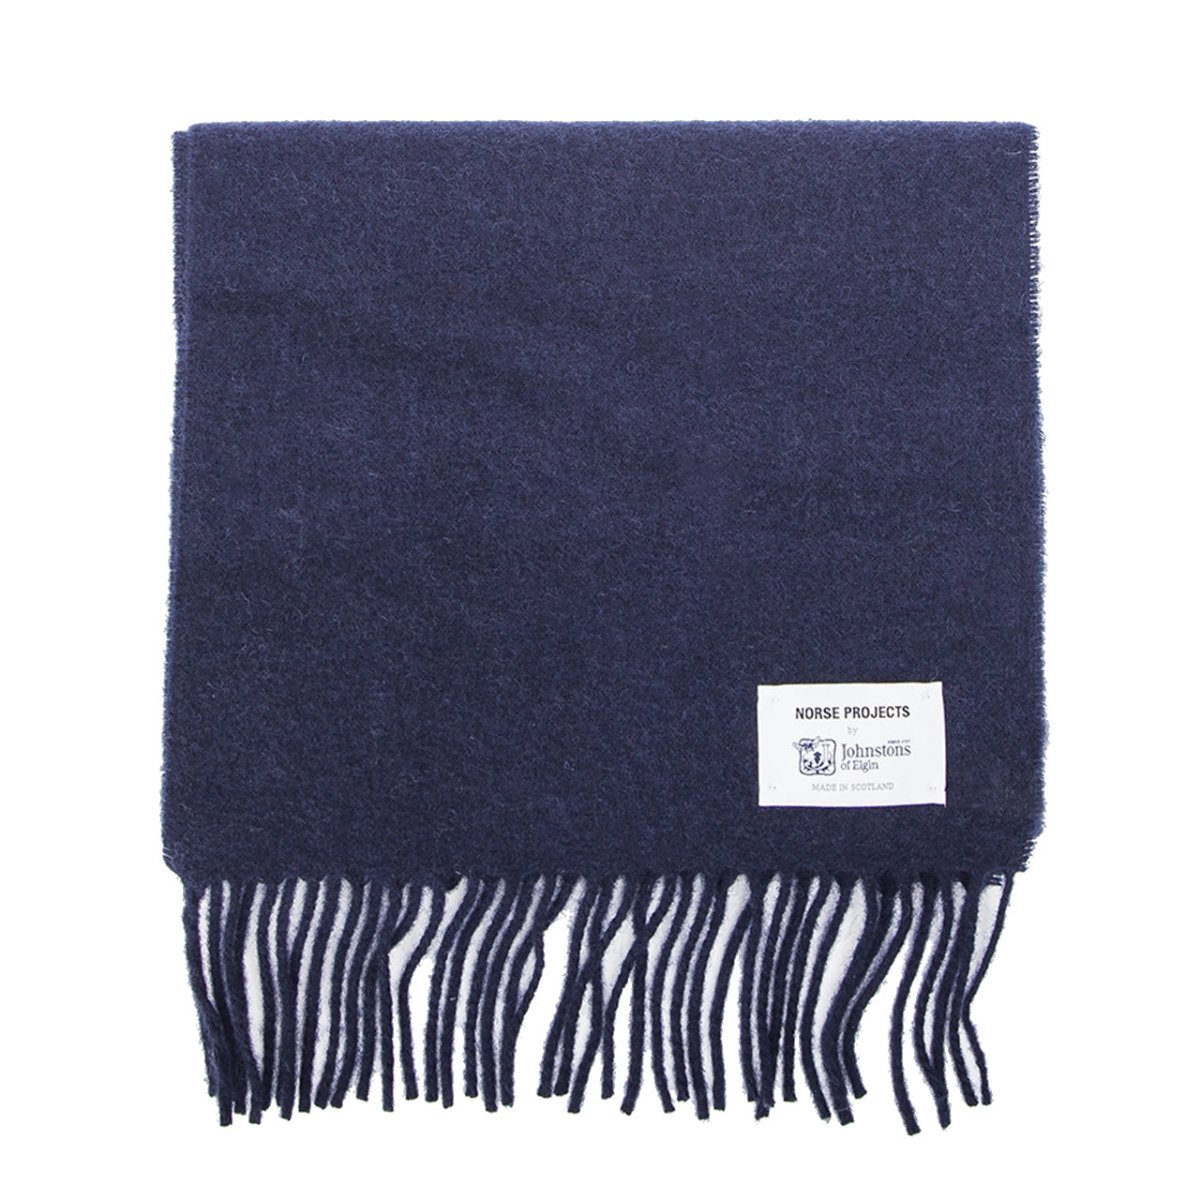 Norse Projects Norse x Johnstons Lambswool Scarf (Navy)  - Allike Store